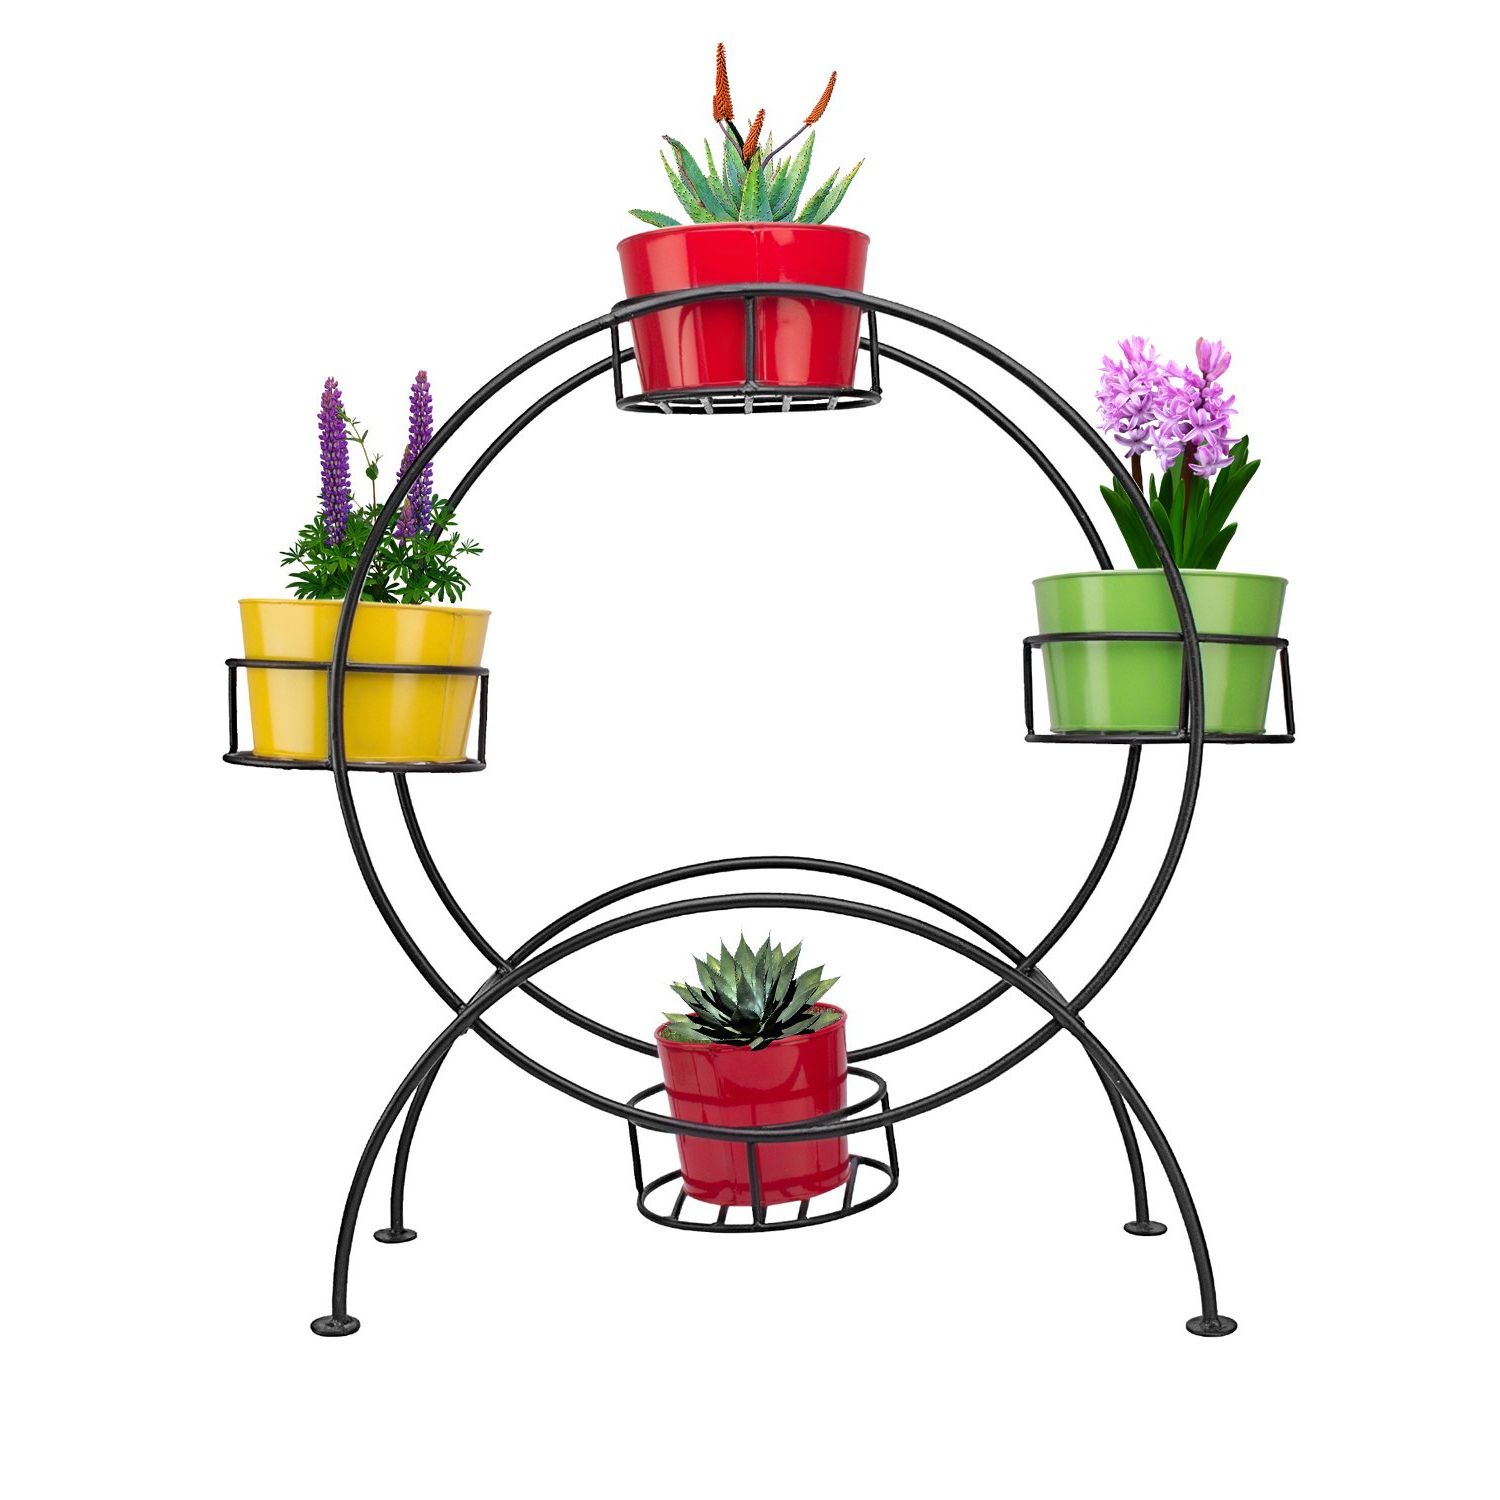 Nuha Metal Round Planter Stand With Pots, Black, Height  71 Cm, Width  26  Cm And Length  77 Cm, Pot Size  22.5 Cm, 1 Piece : Amazon (View 4 of 15)